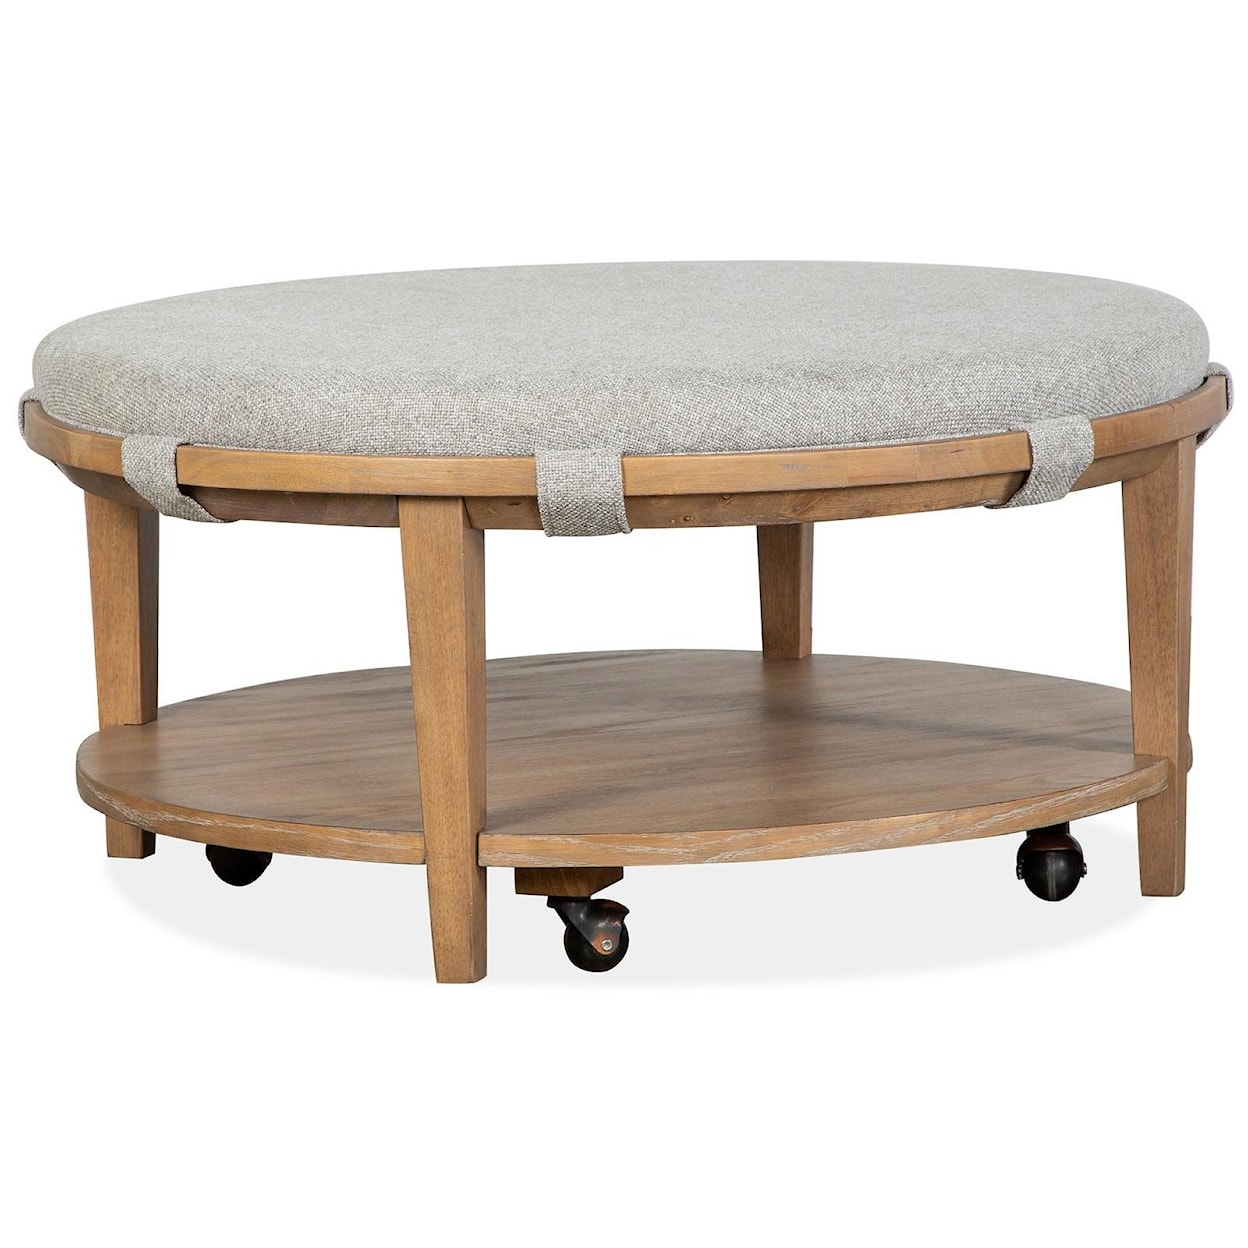 Magnussen Home Lindon Round Cocktail Table